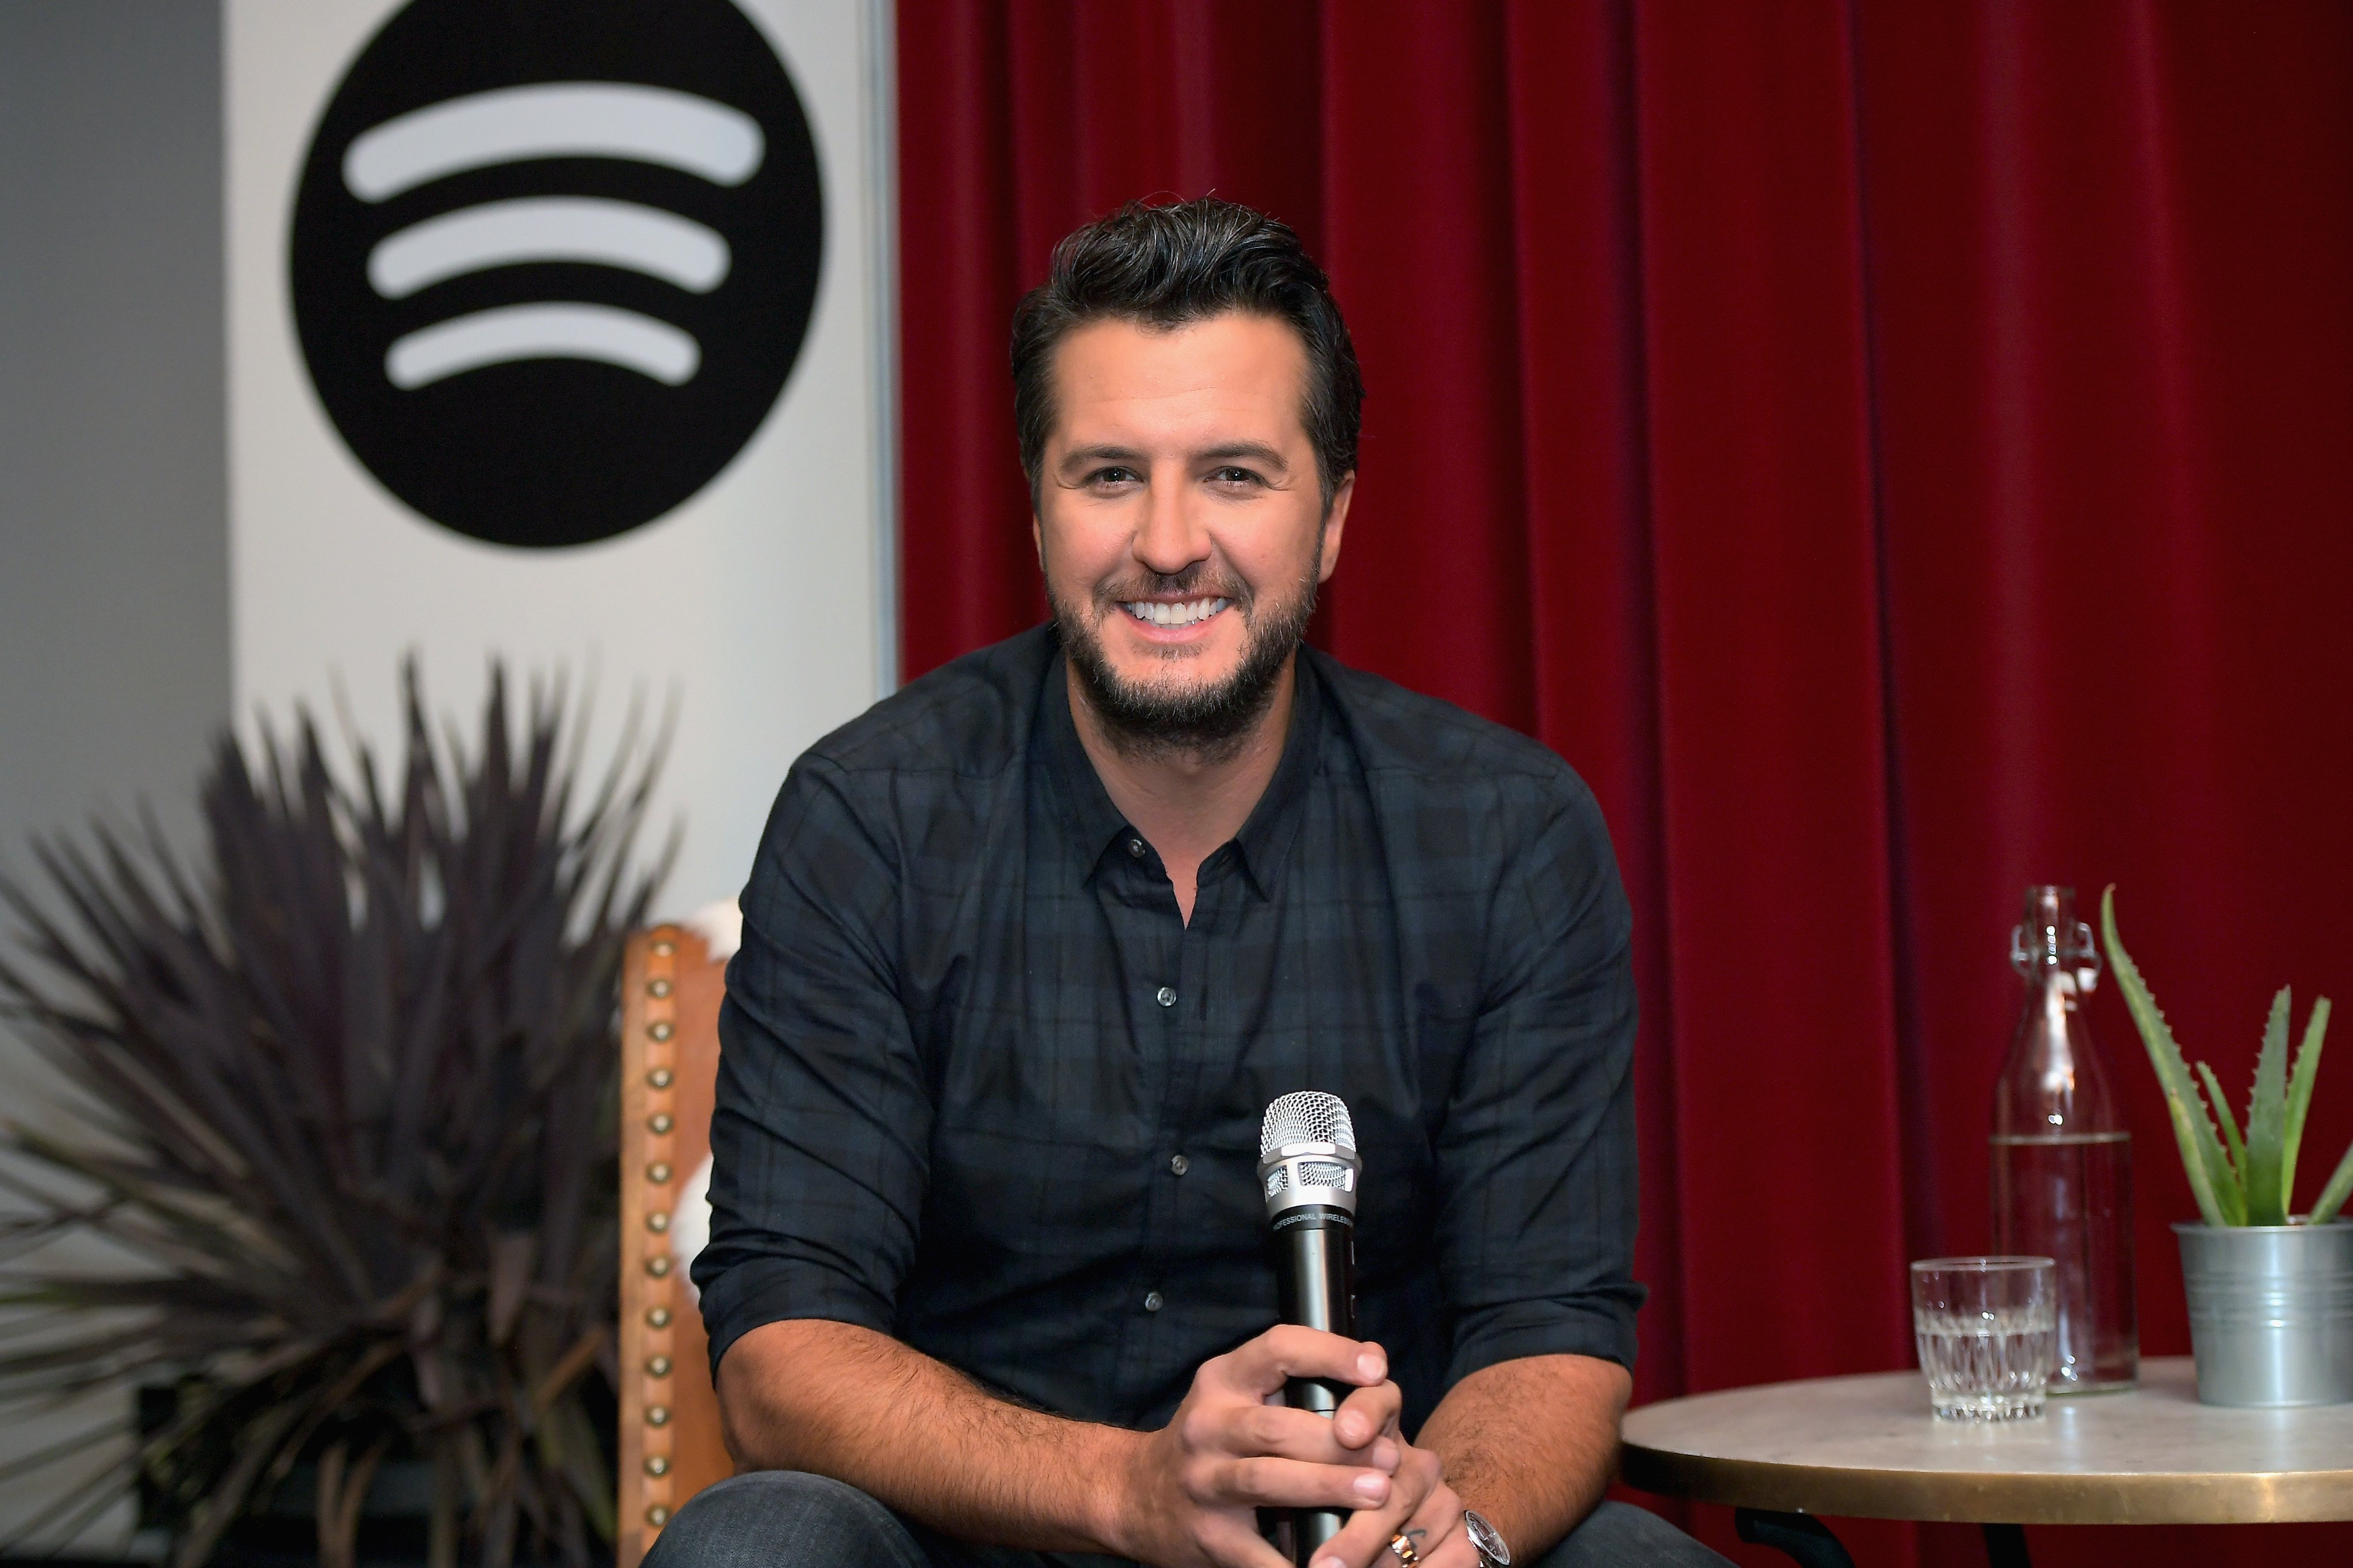 Country Music star Luke Bryan during his 2017 meeting with his fans in Los Angeles. | Photo: Getty Images